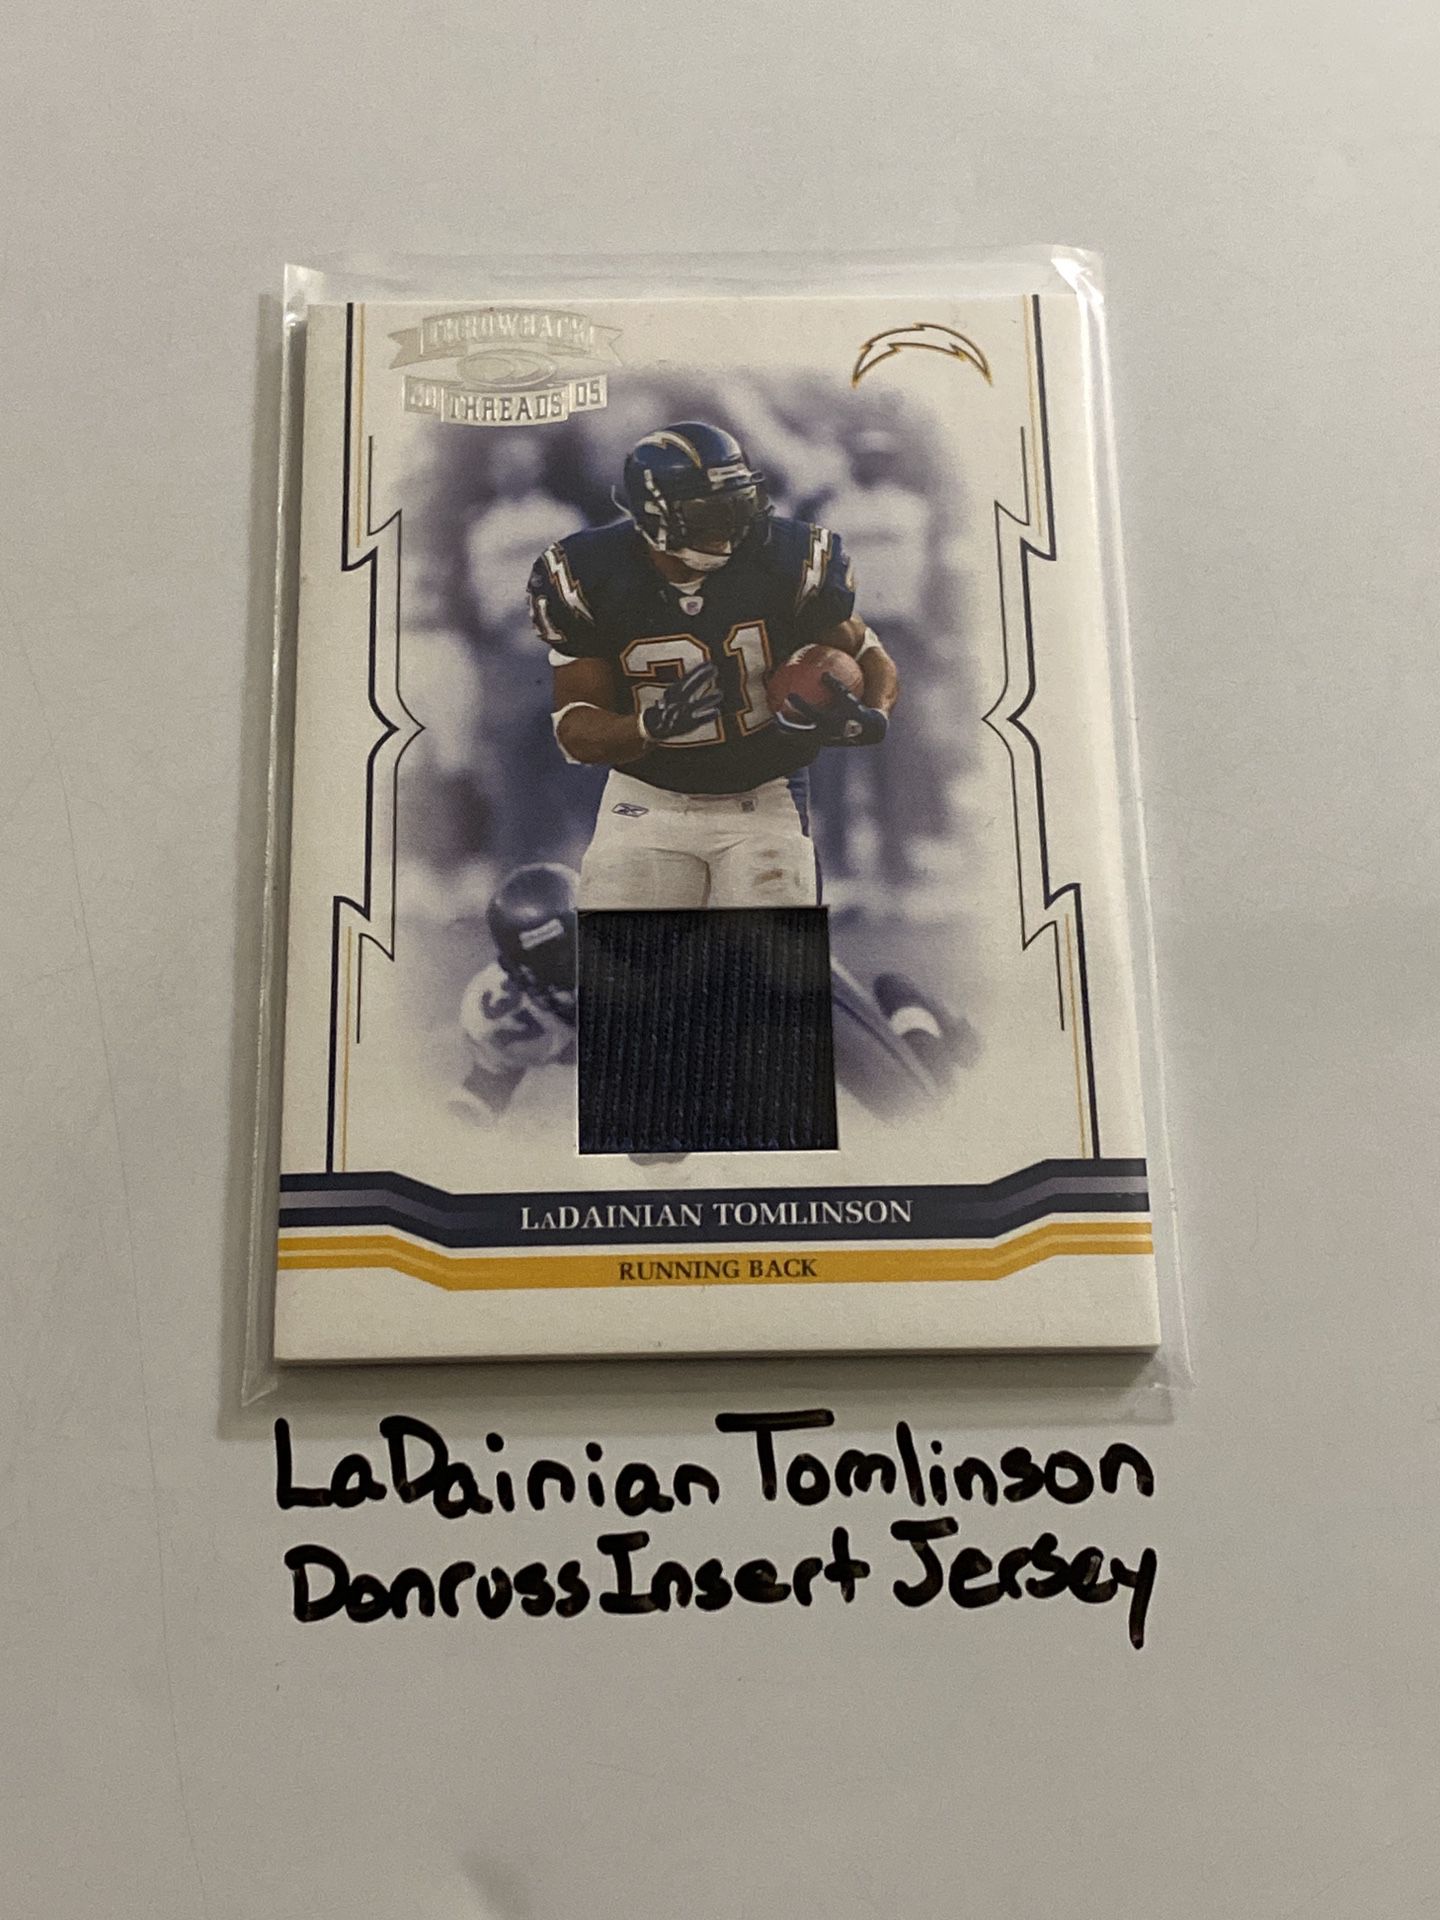 LaDainian Tomlinson San Diego Chargers Hall of Fame RB Donruss Short Print Insert Jersey Card. 